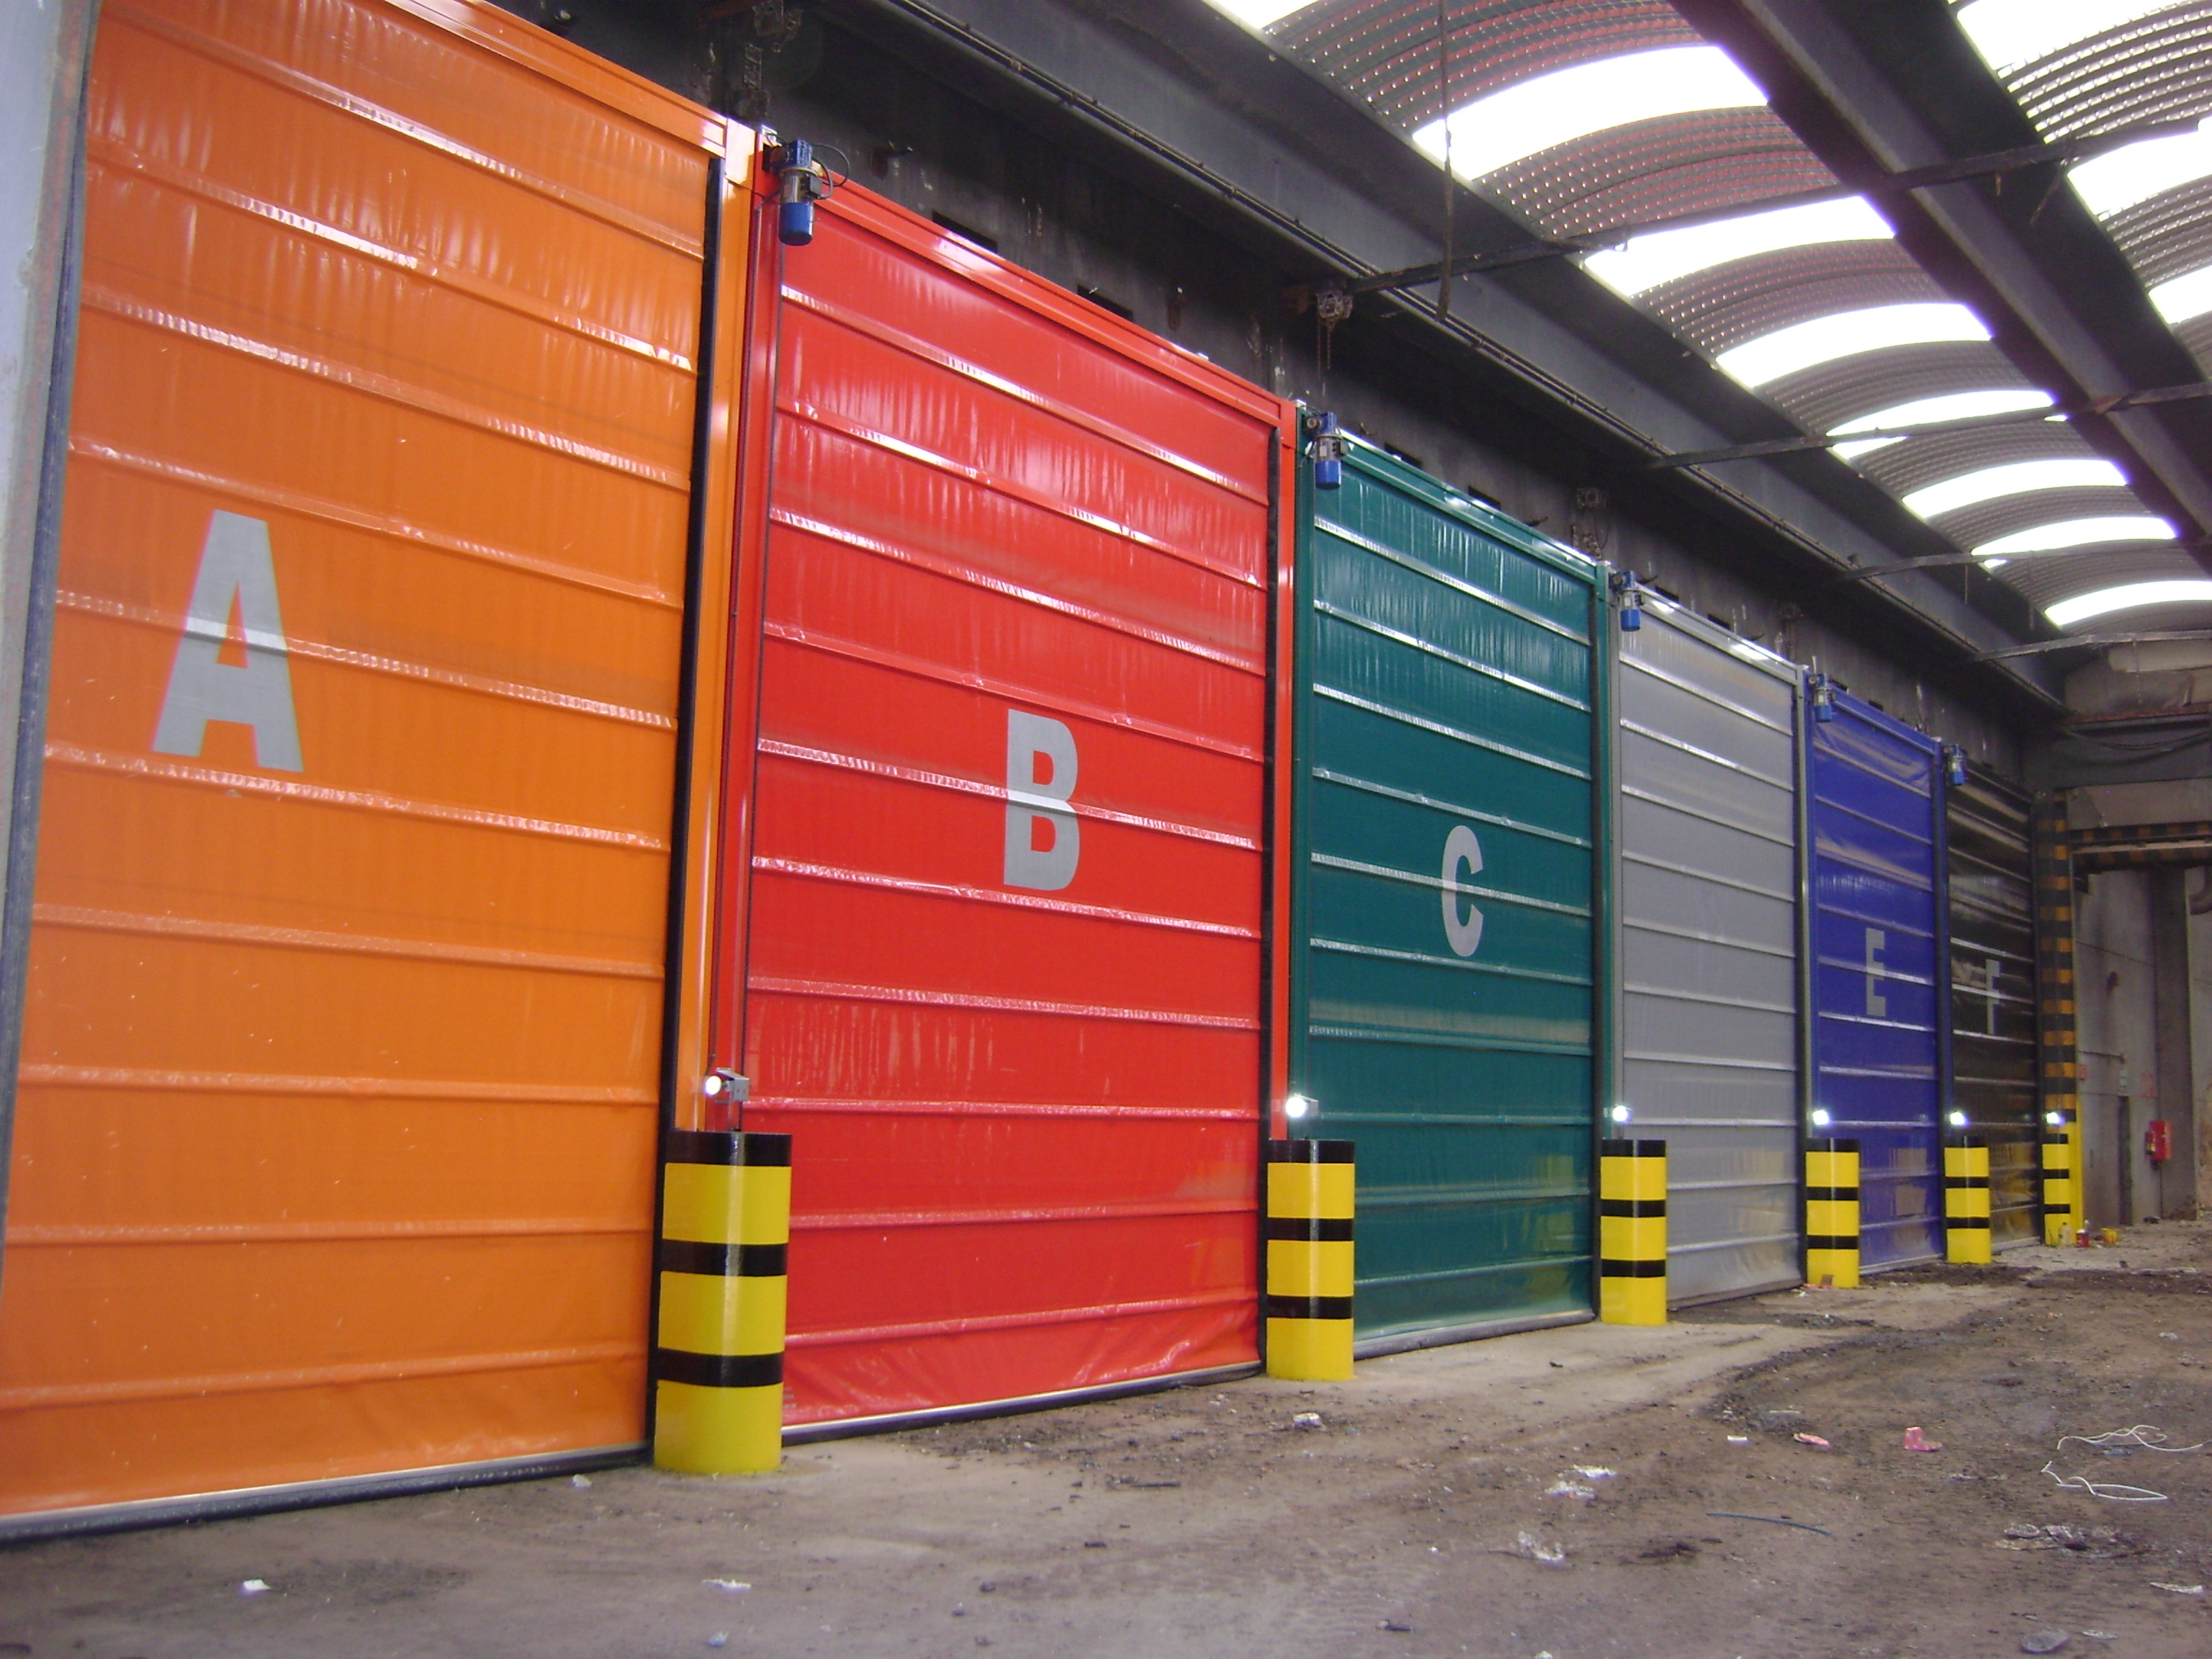 high-speed doors at the premises of the waste company cepsa